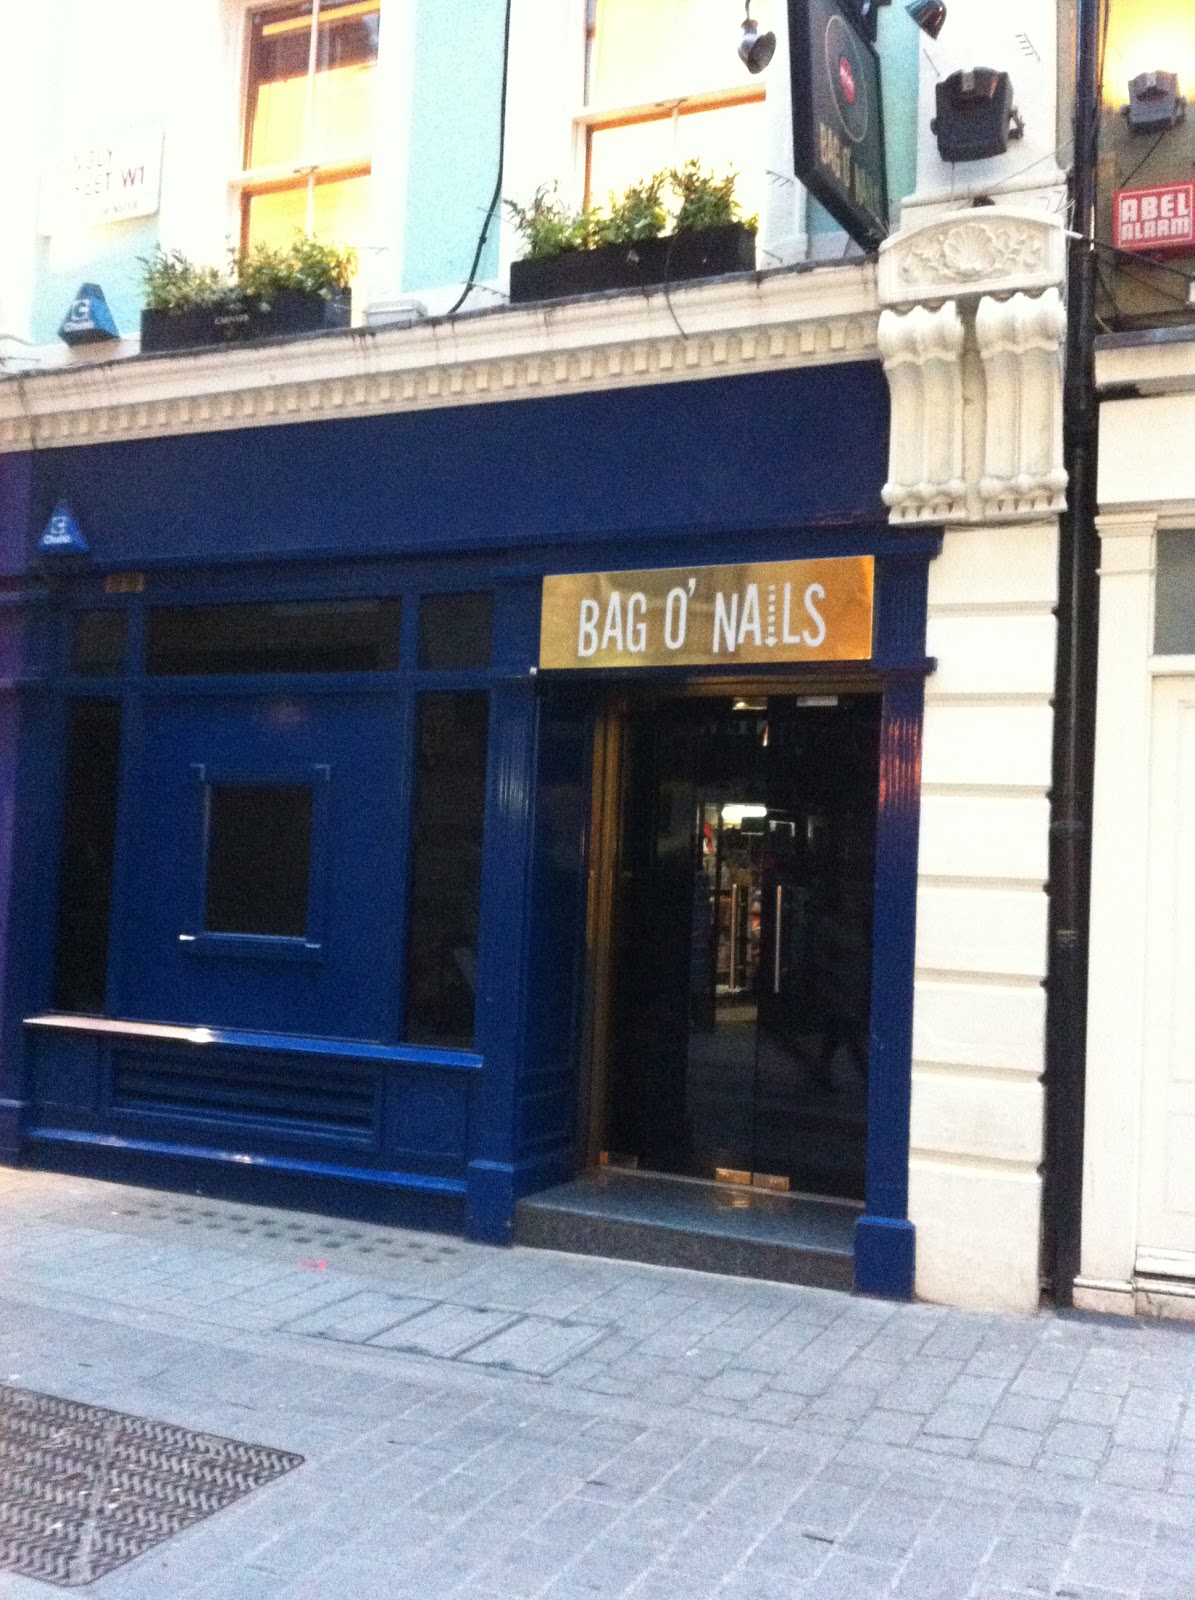 Babel blog: Soho jazz venues. What are they now?